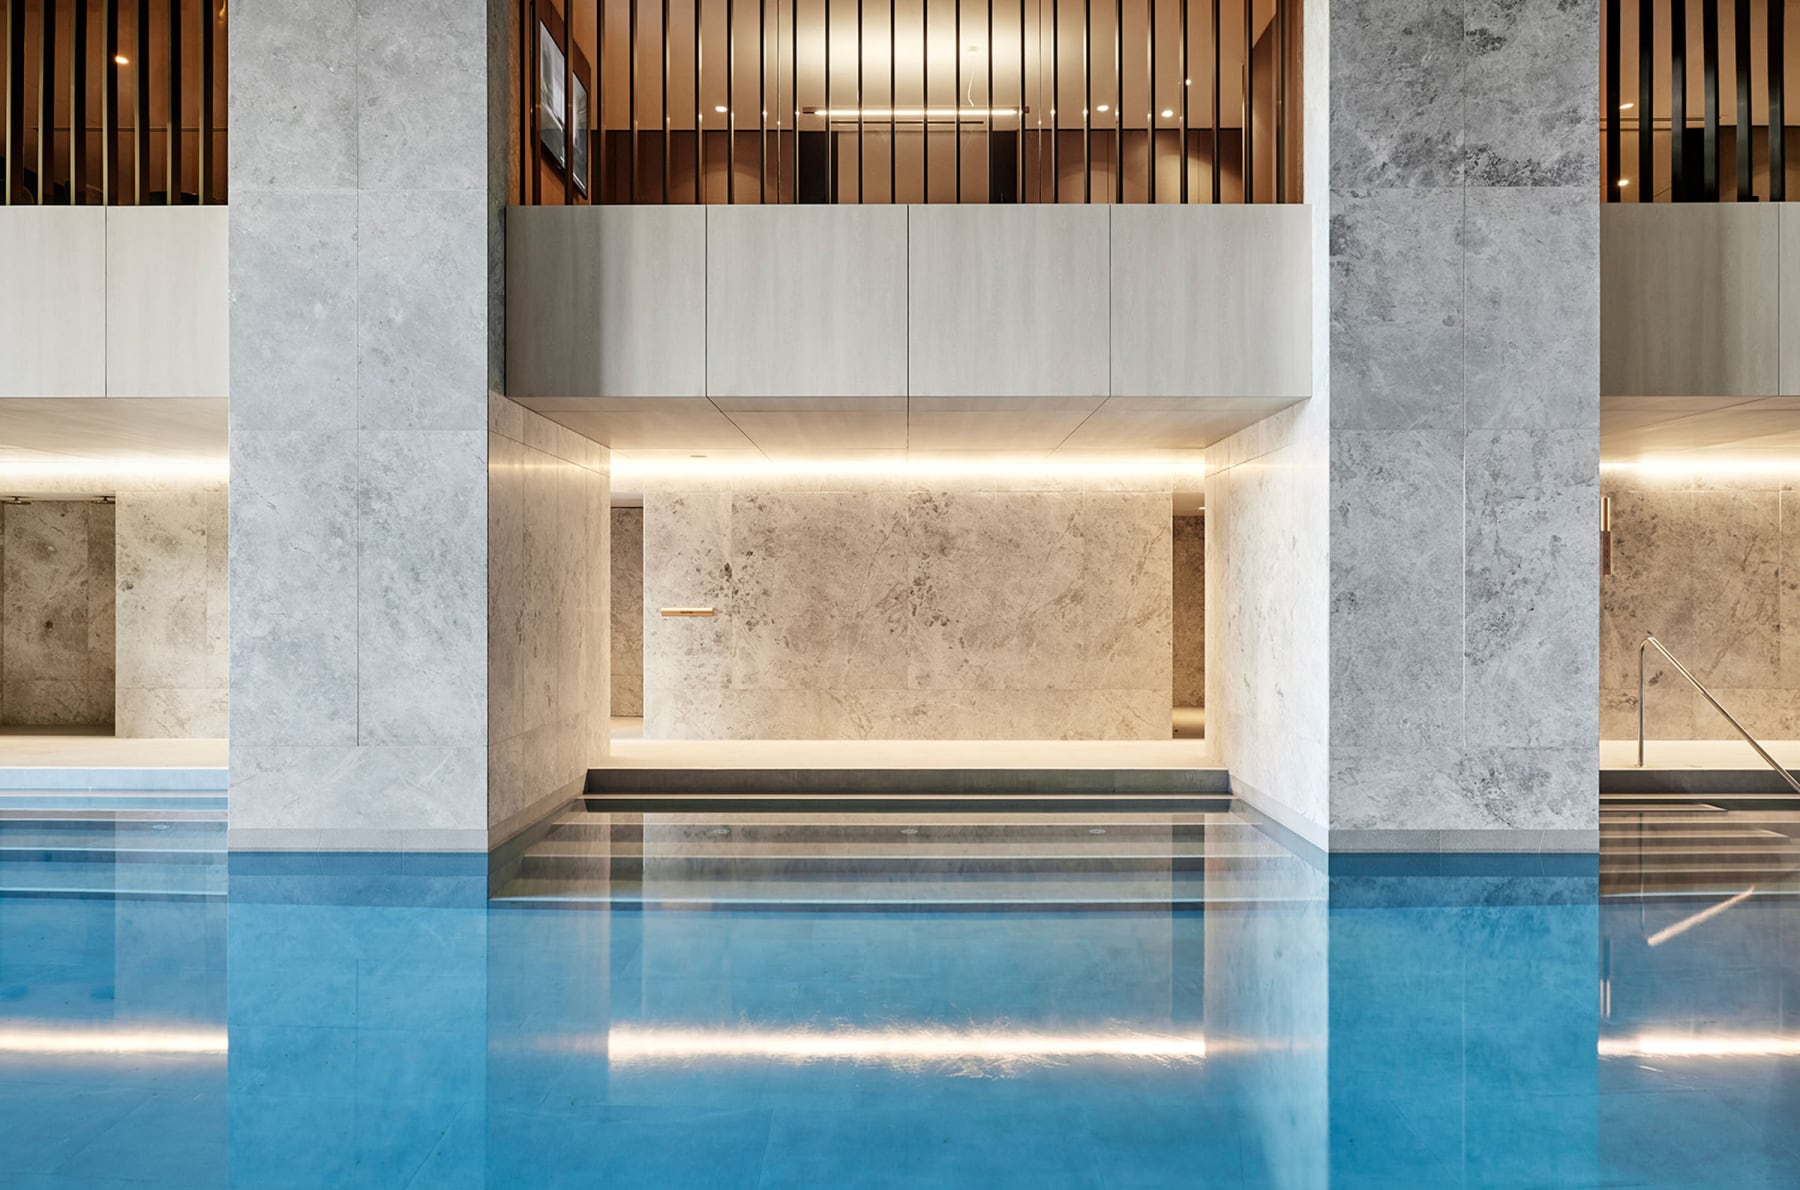 A pool with a steam room and sauna